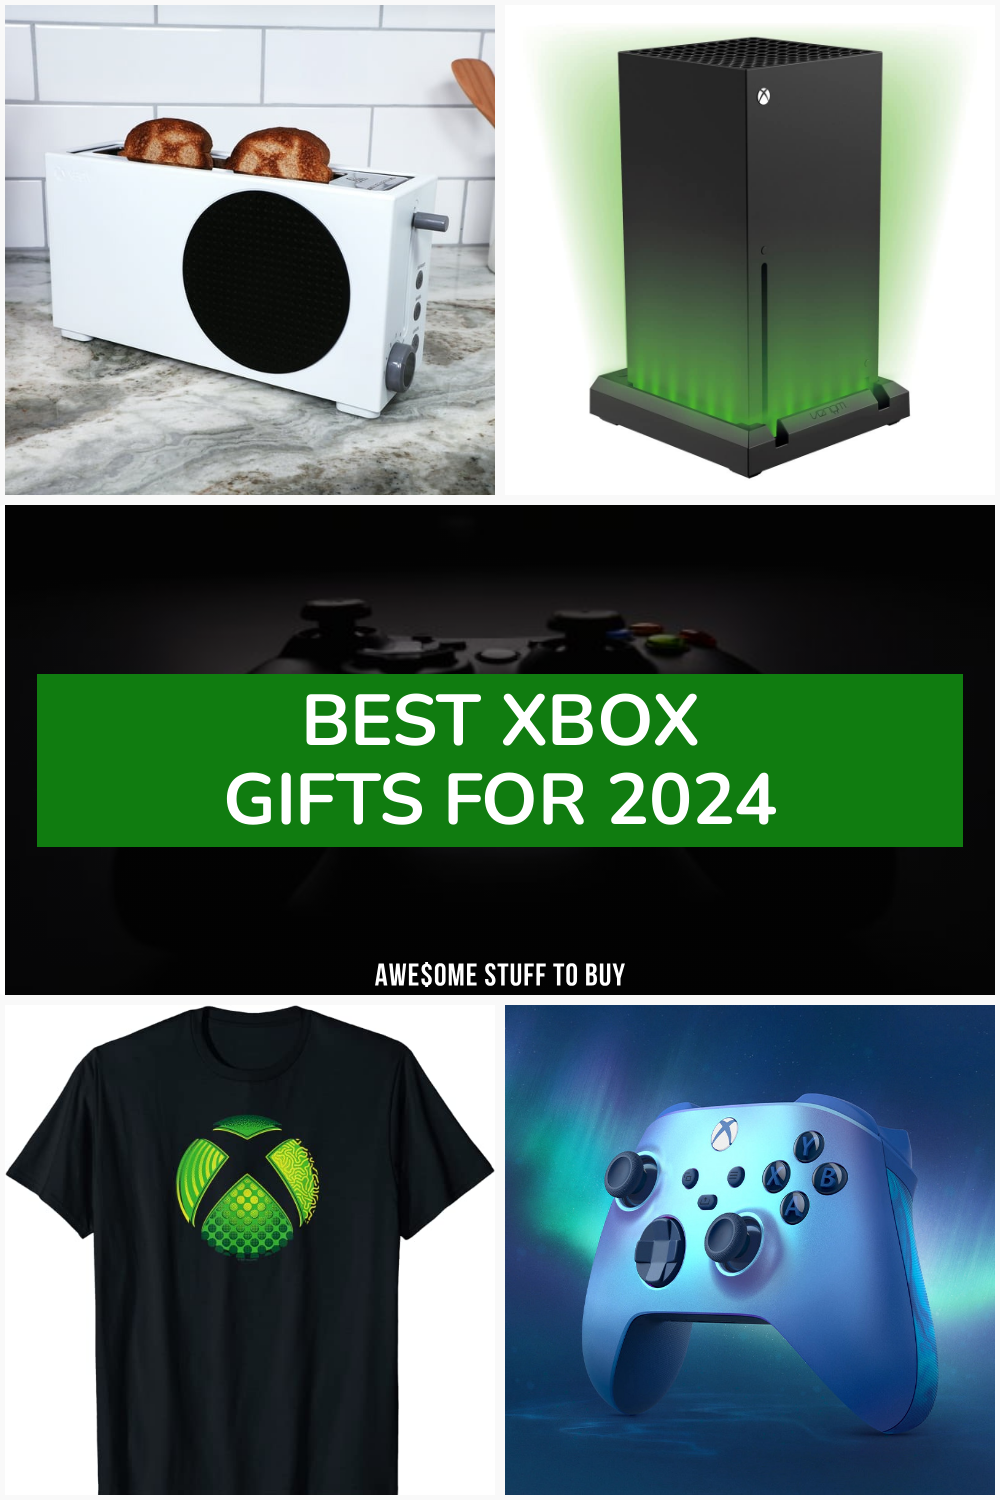 Xbox Gifts // Awesome Stuff to Buy